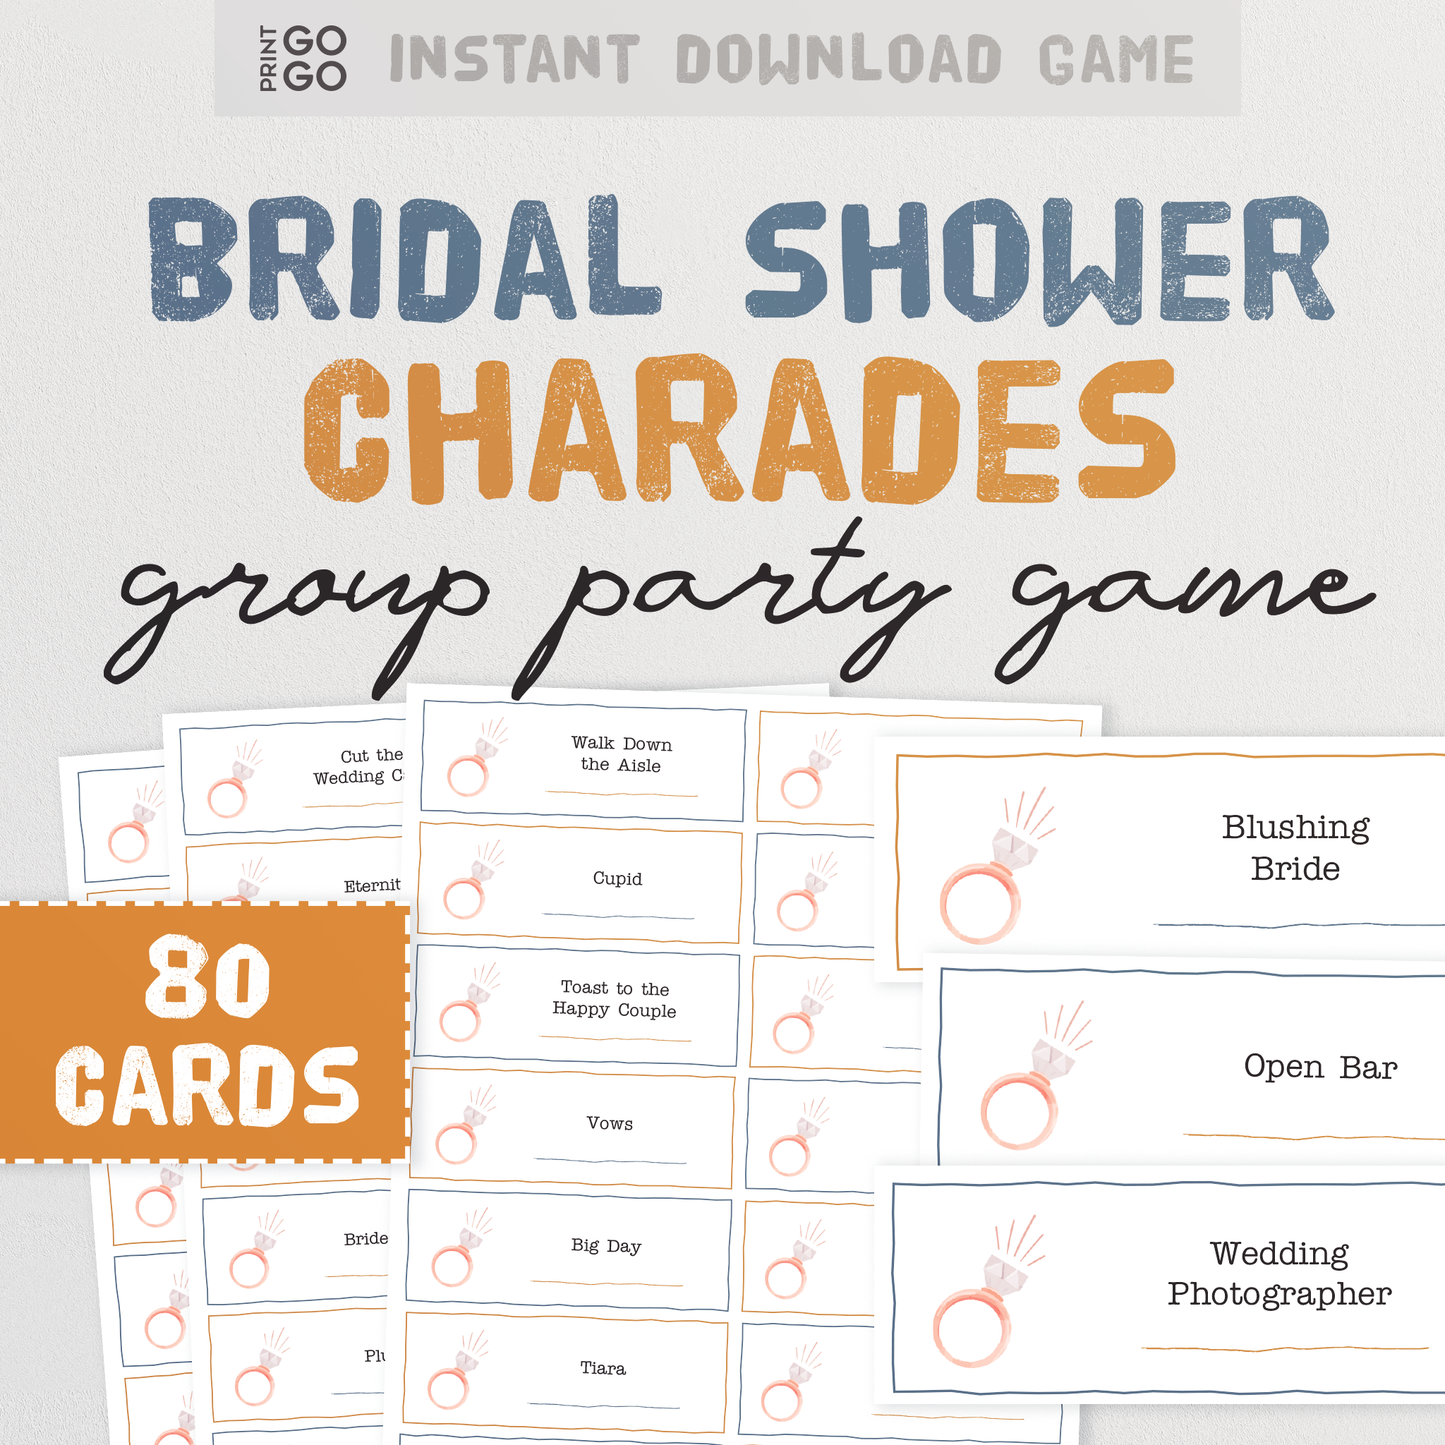 Wedding / Bridal Shower Charades - The Fun Group Party Game of Acting Out